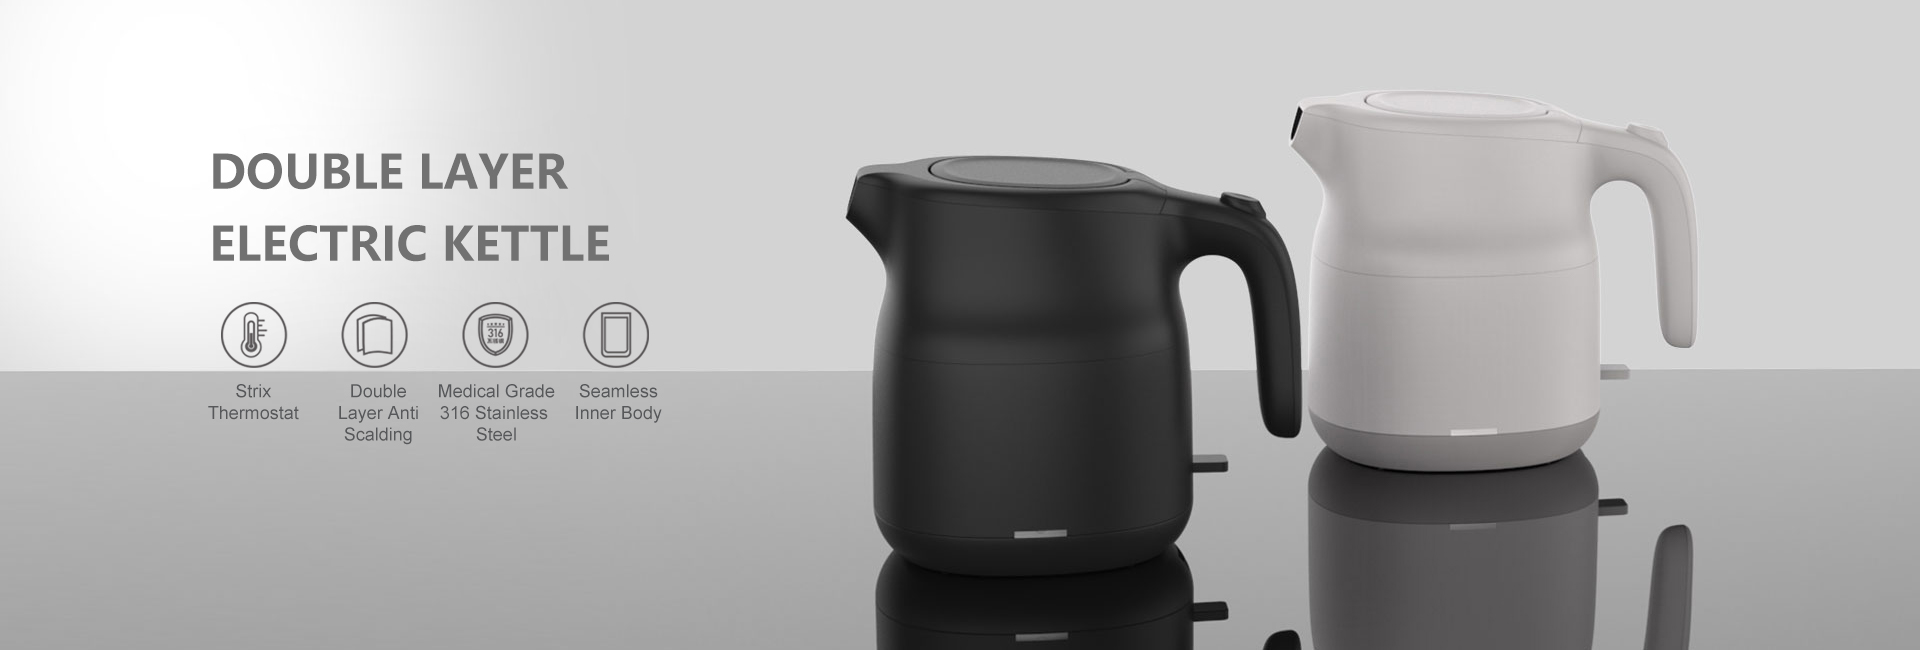 BW366 Electric Kettle